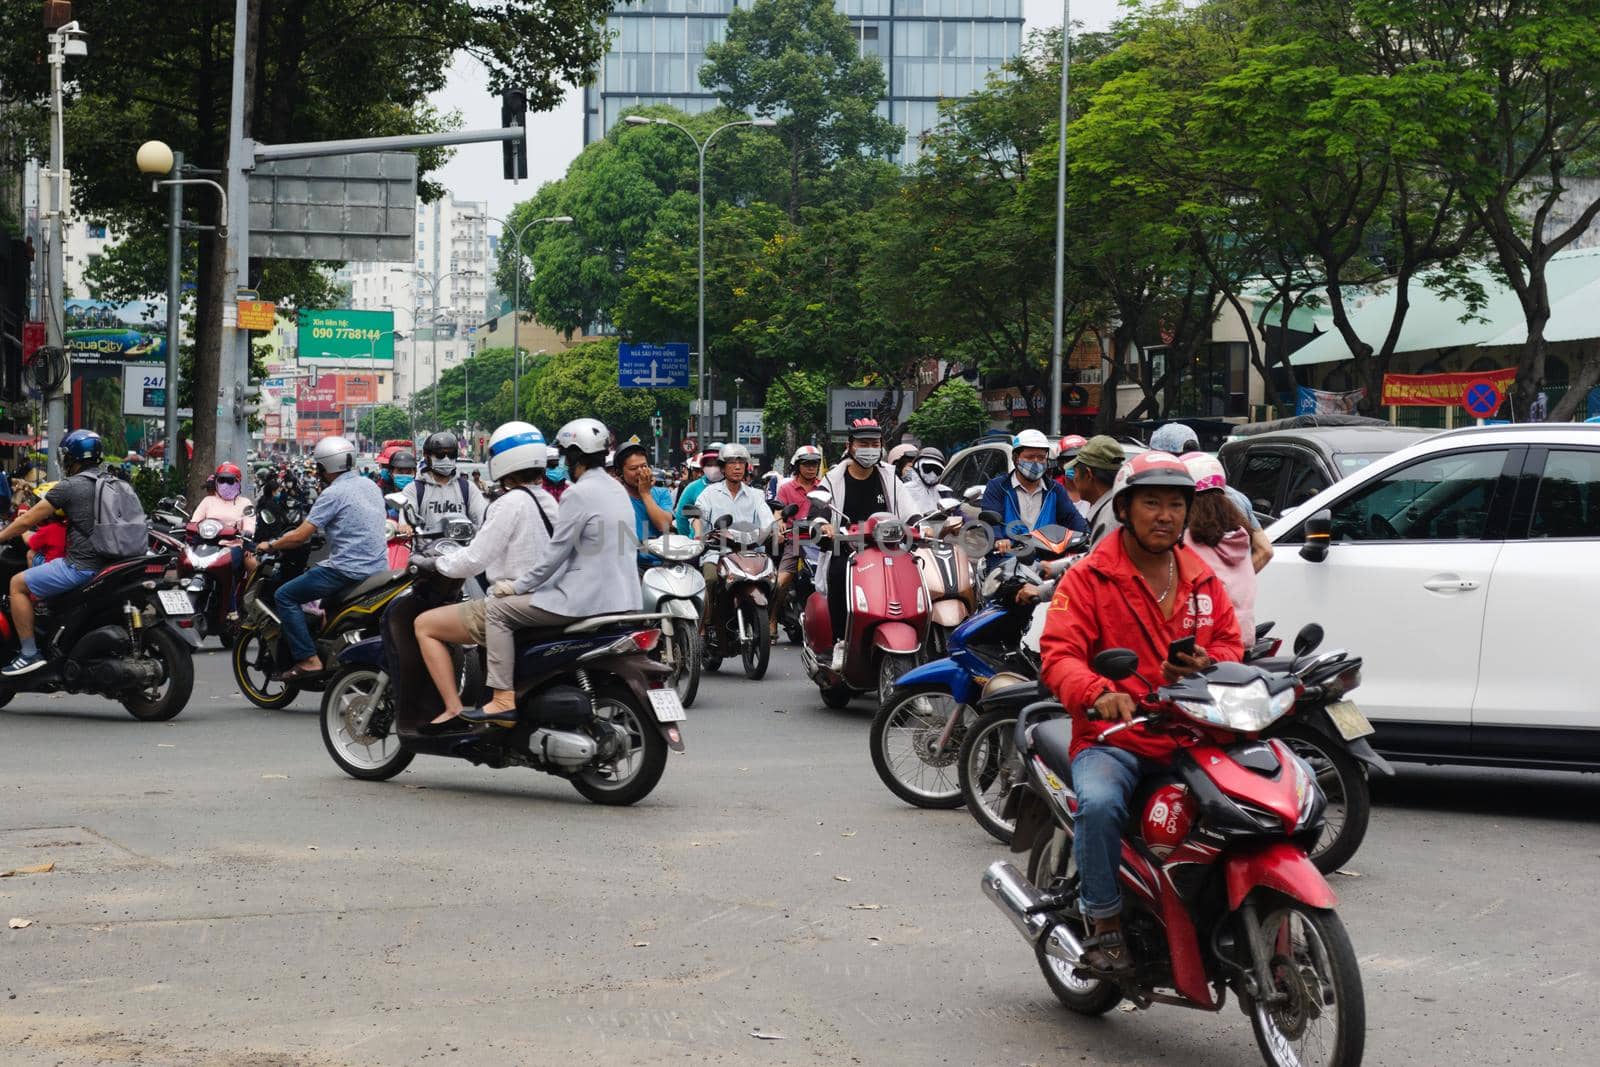 2019-11-10 / Ho Chi Minh City, Vietnam - Urban scene in rush hour. Motorcycles flood the chaotic traffic flow of the city.